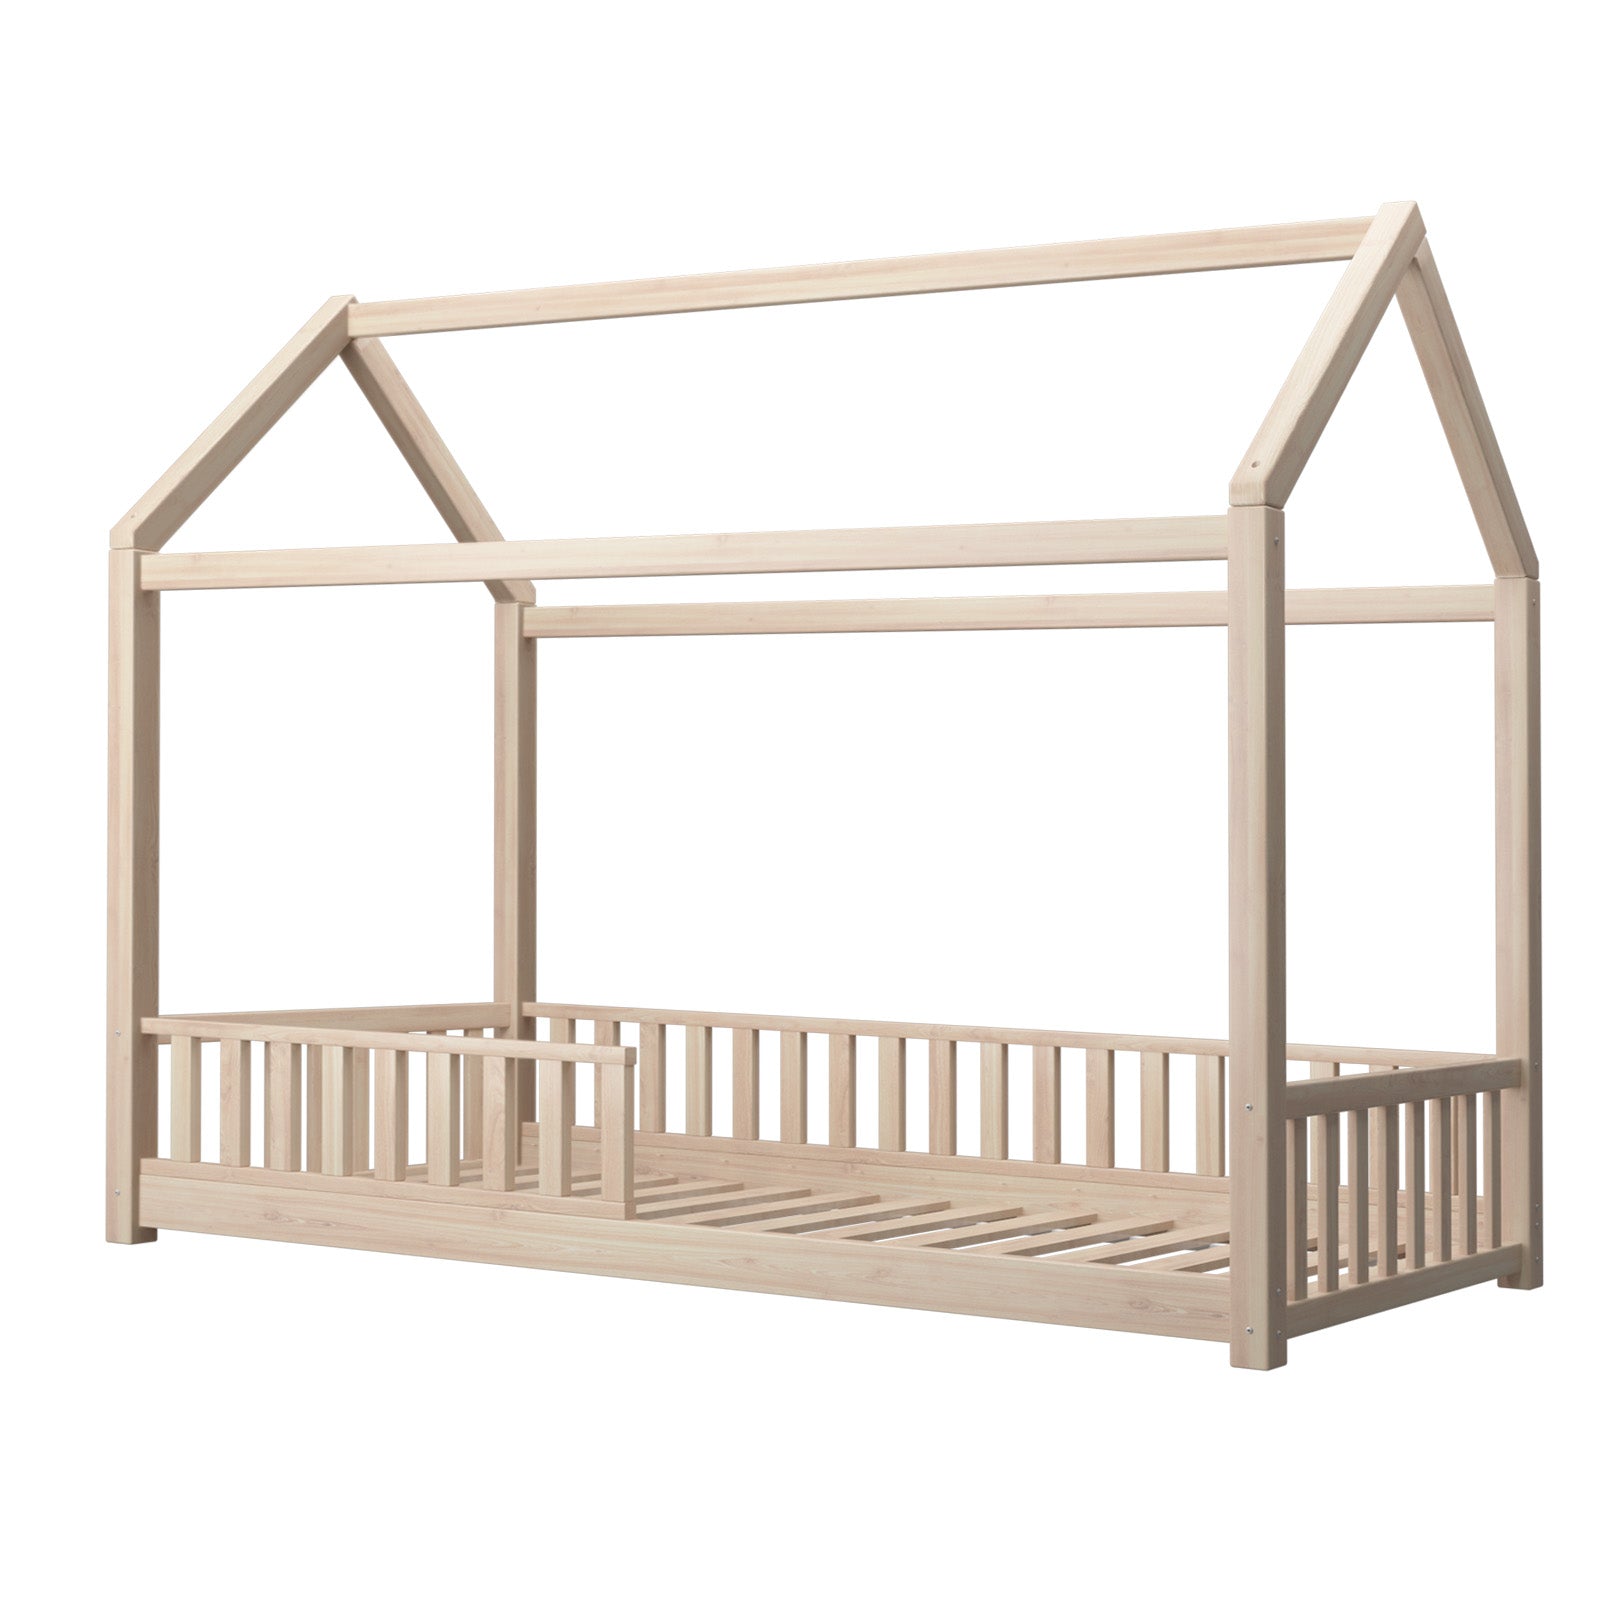 Oikiture Bed Frame Single Wooden Timber House Frame Wood Mattress Base